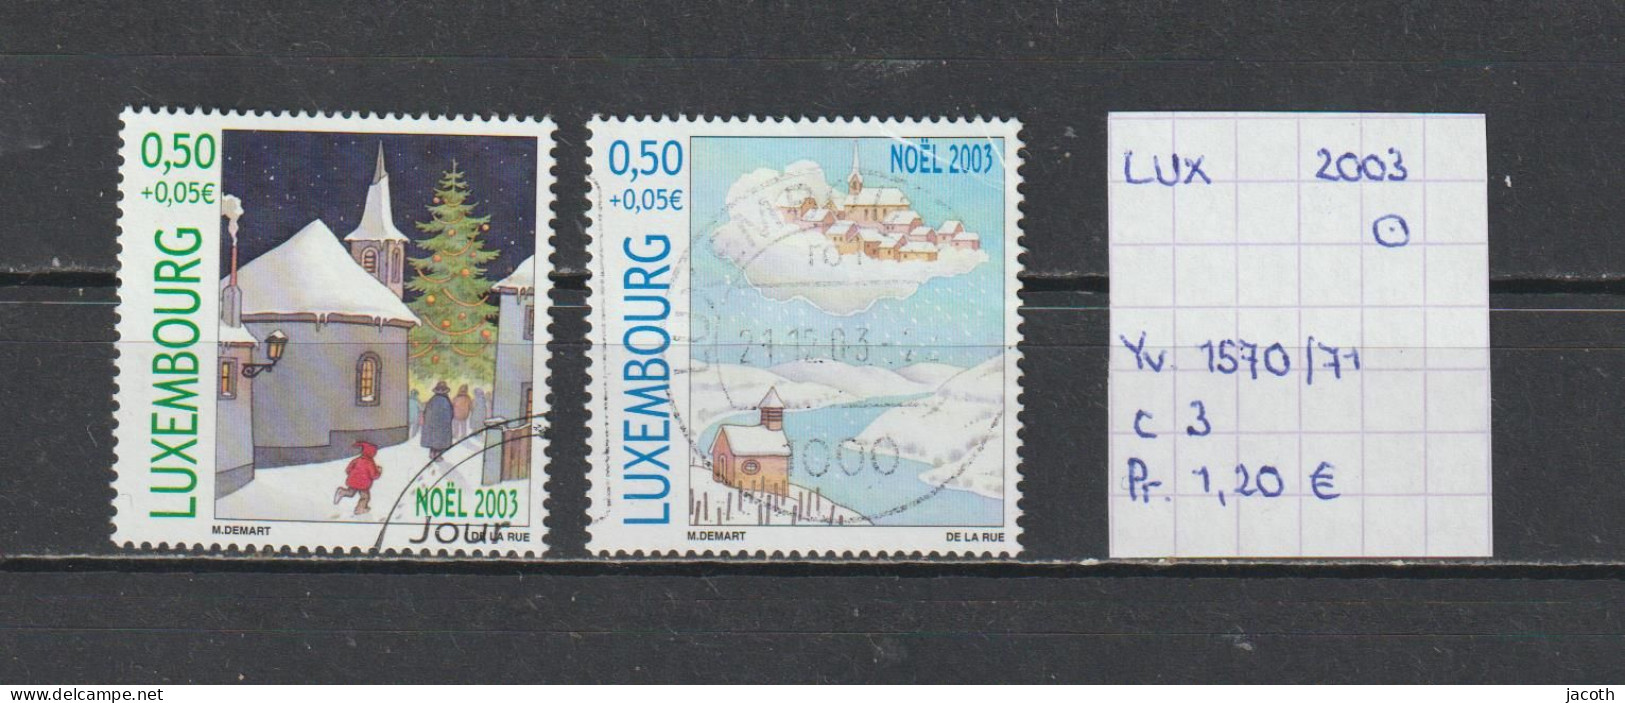 (TJ) Luxembourg 2003 - YT 1570/71 (gest./obl./used) - Gebraucht